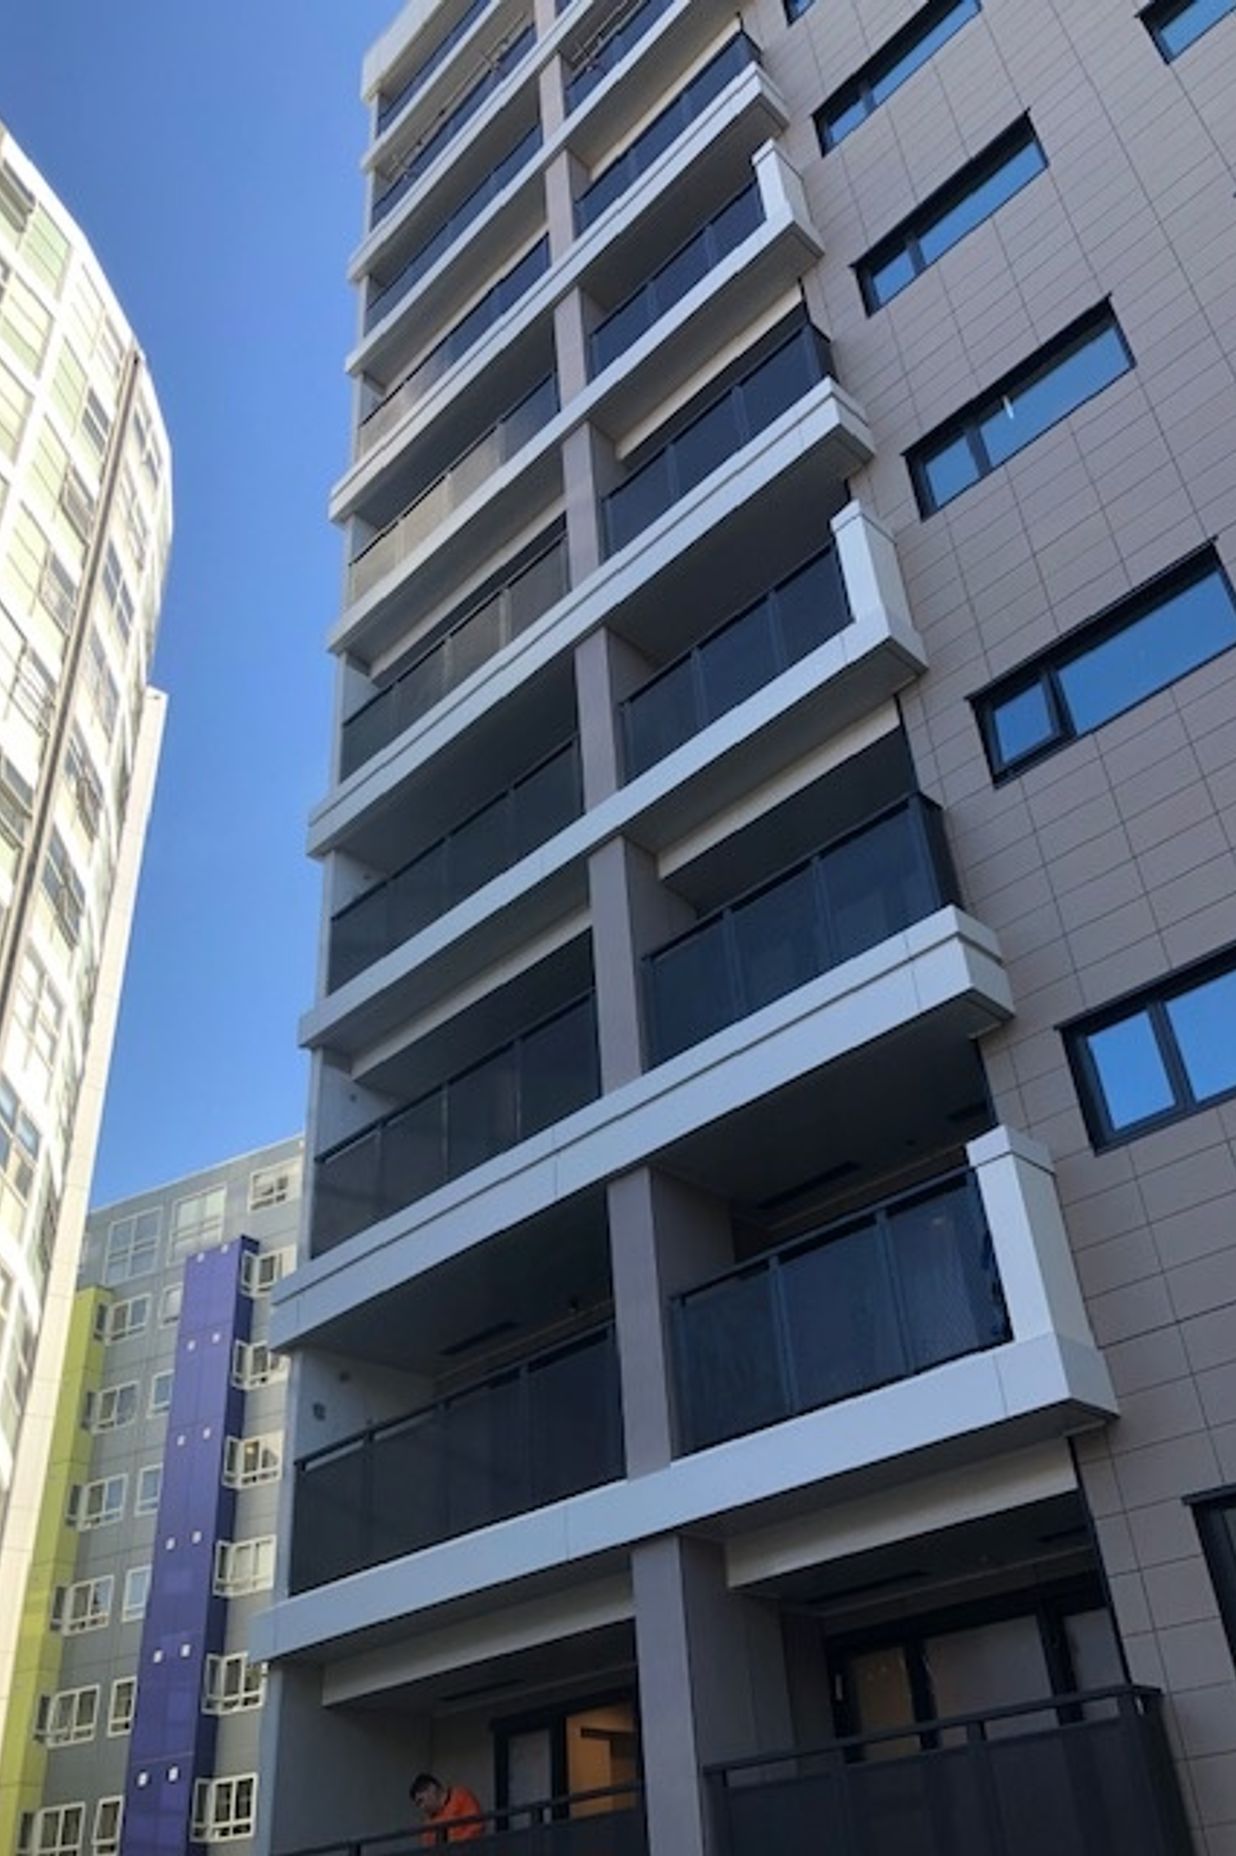 Initially engaged to provide parapet caps for the 139 Greys Ave development, ACMF ended up providing solutions for flashings, fascia, soffits and inter-tenancy screens.